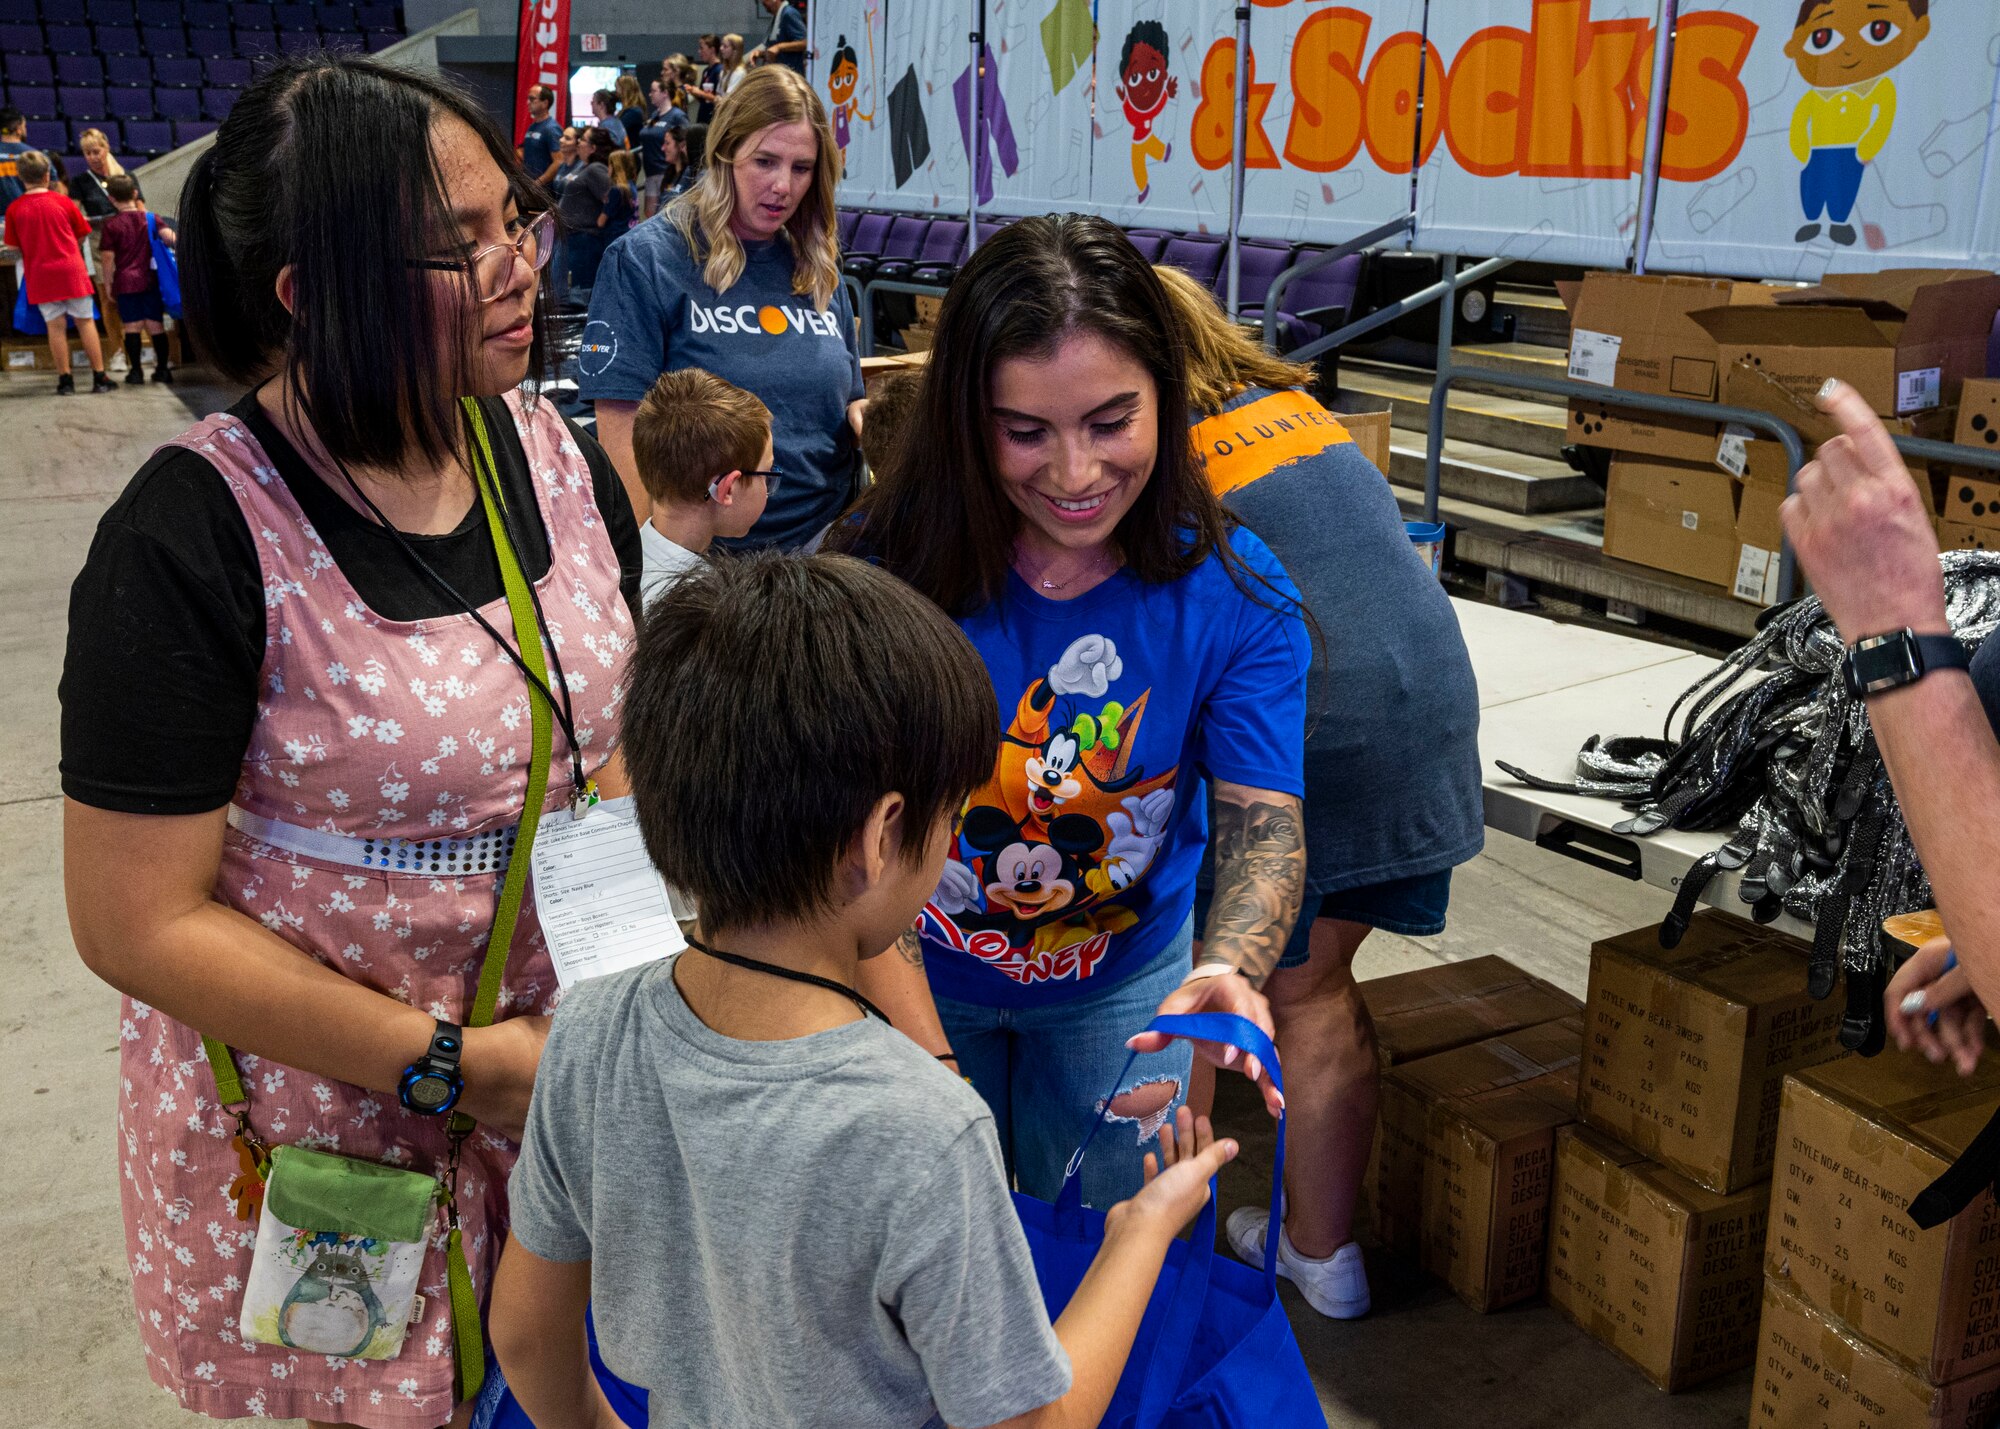 U.S. Air Force Staff Sgt. Angela Rudolph, 56th Force Support Squadron force management, helps a family shop for new school supplies and clothes at the Back to School Bash event July 20, 2022, at Grand Canyon University, Phoenix, Arizona.